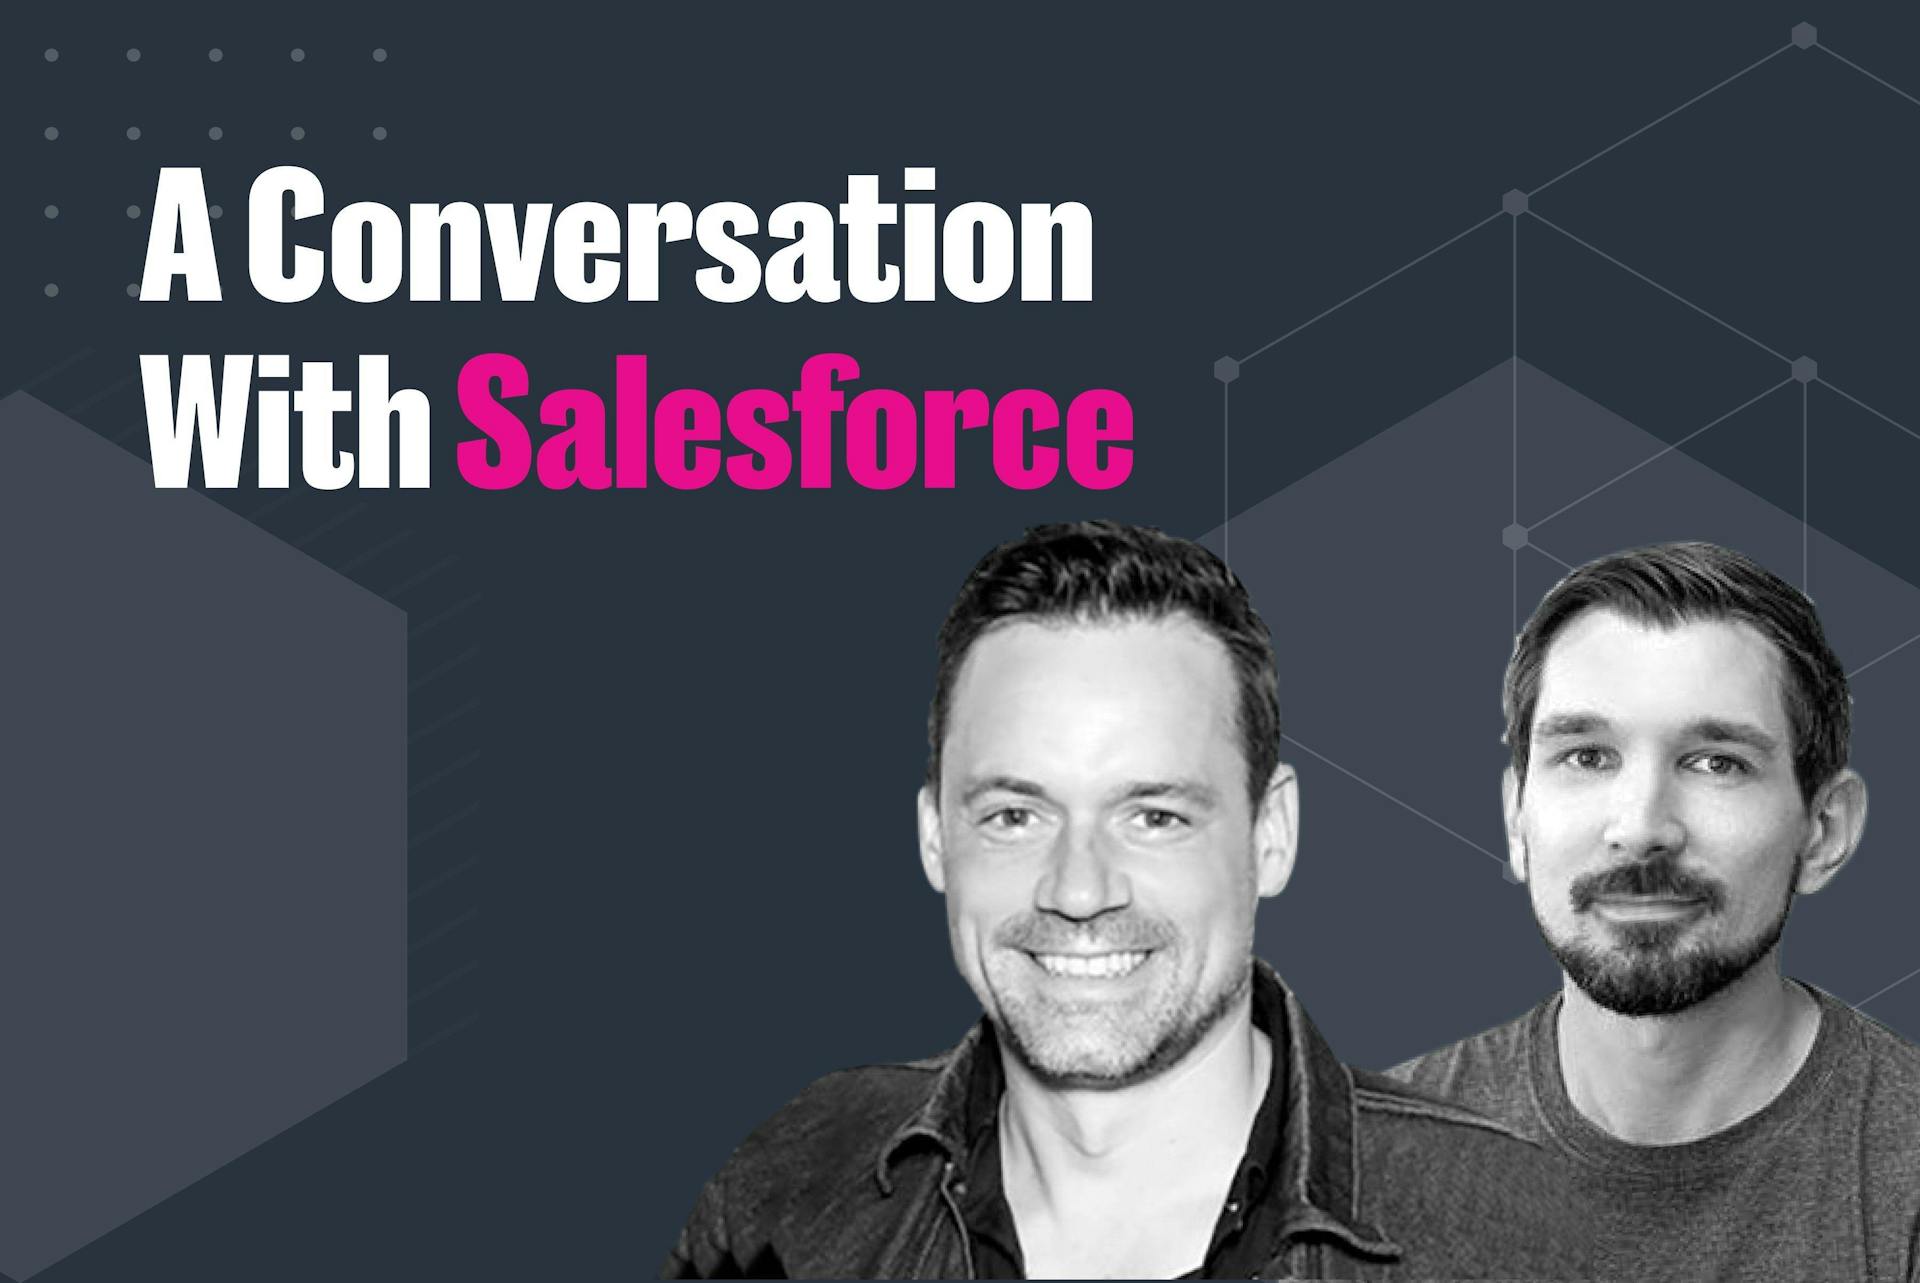 A conversation with Salesforce